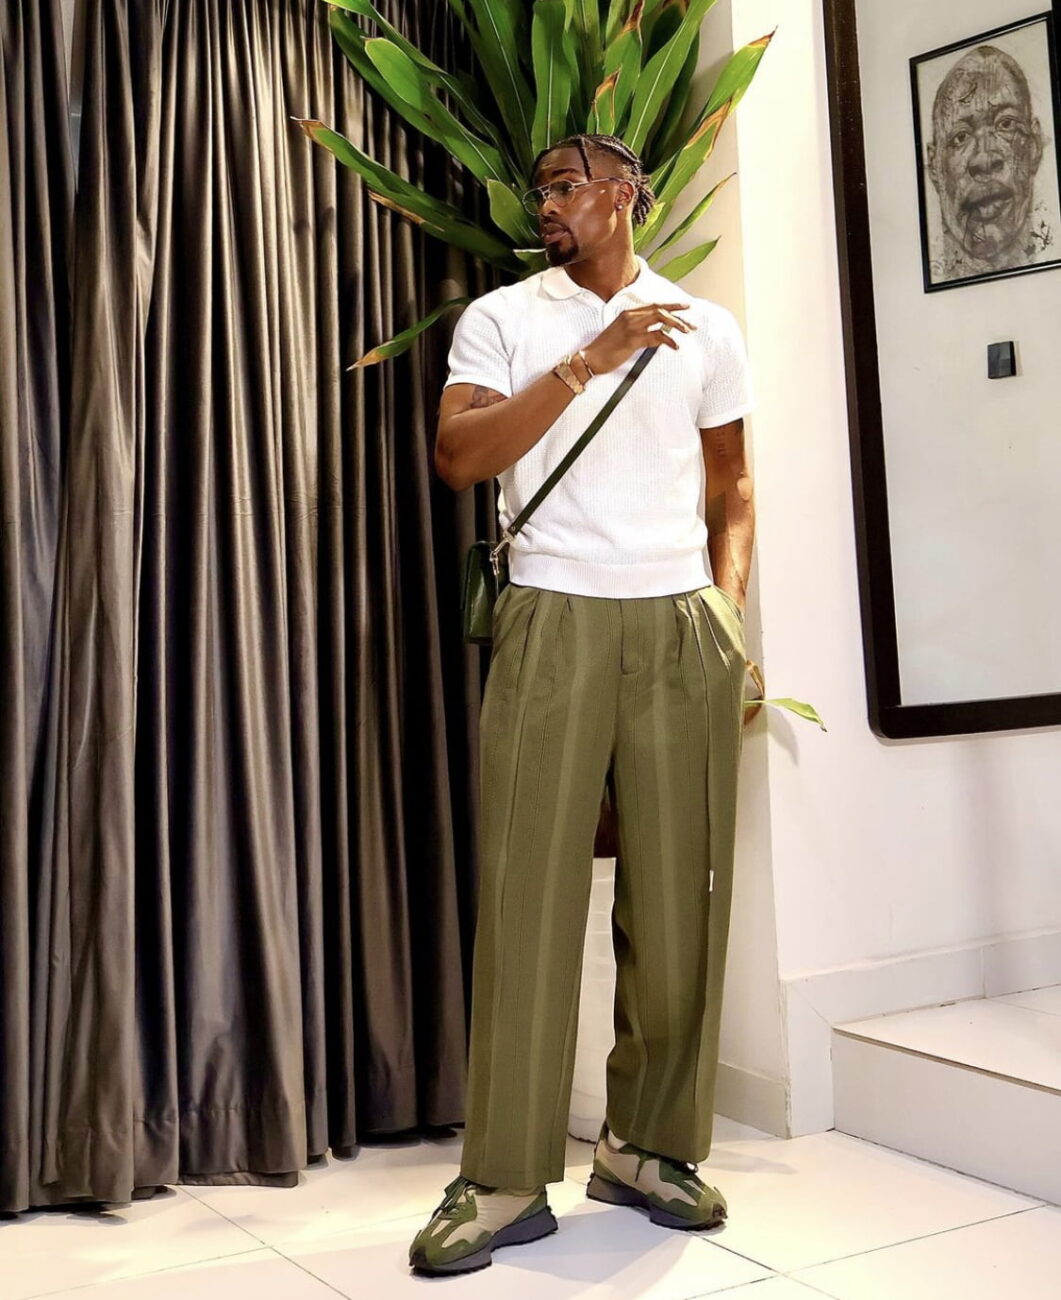 Neo Akpofure in a white shirt and green trousers.